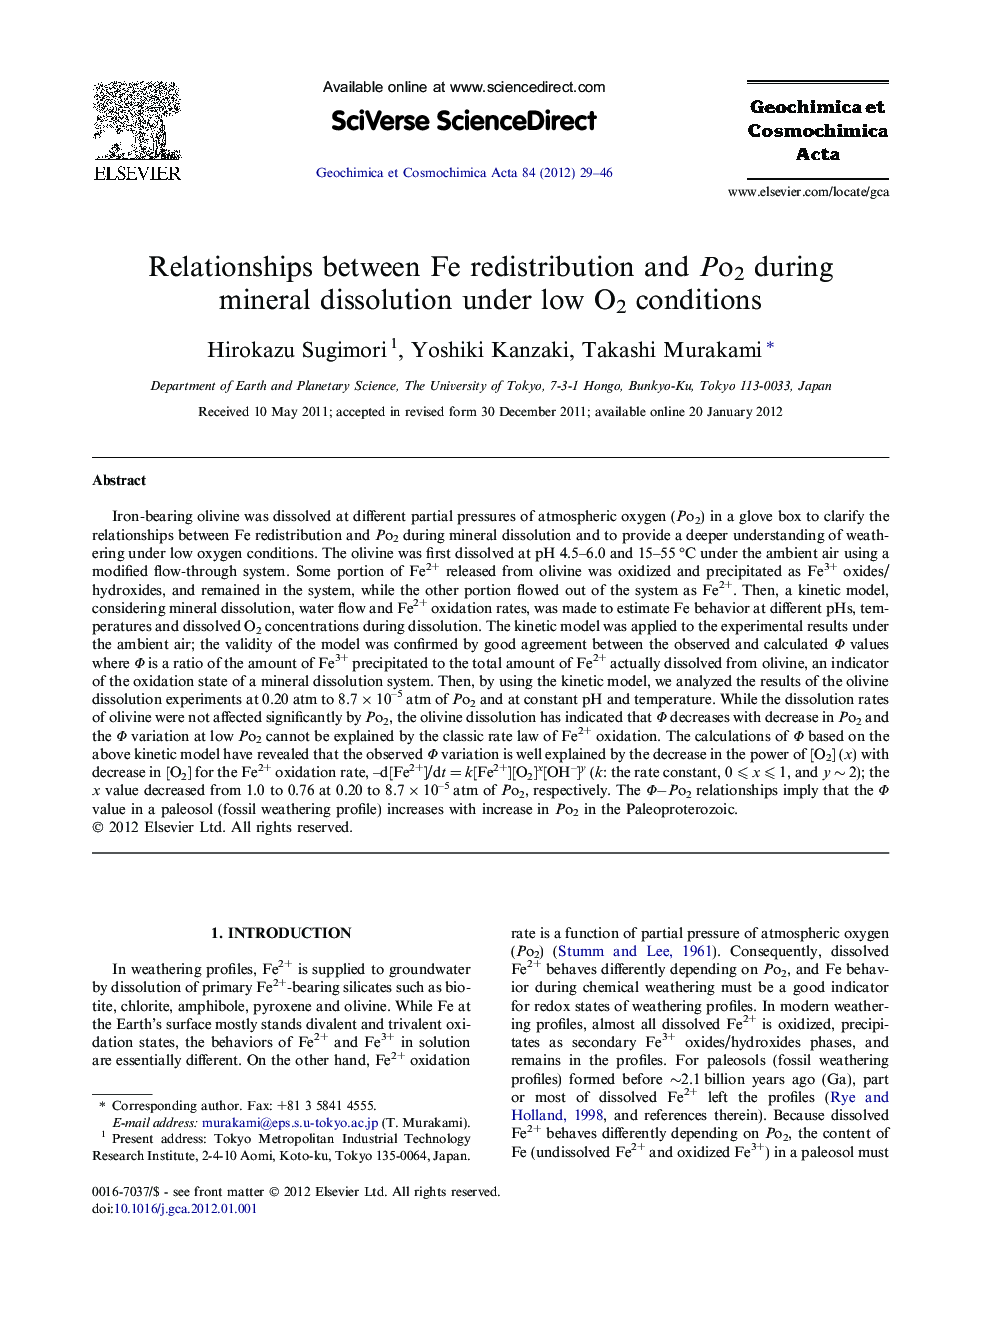 Relationships between Fe redistribution and Po2 during mineral dissolution under low O2 conditions